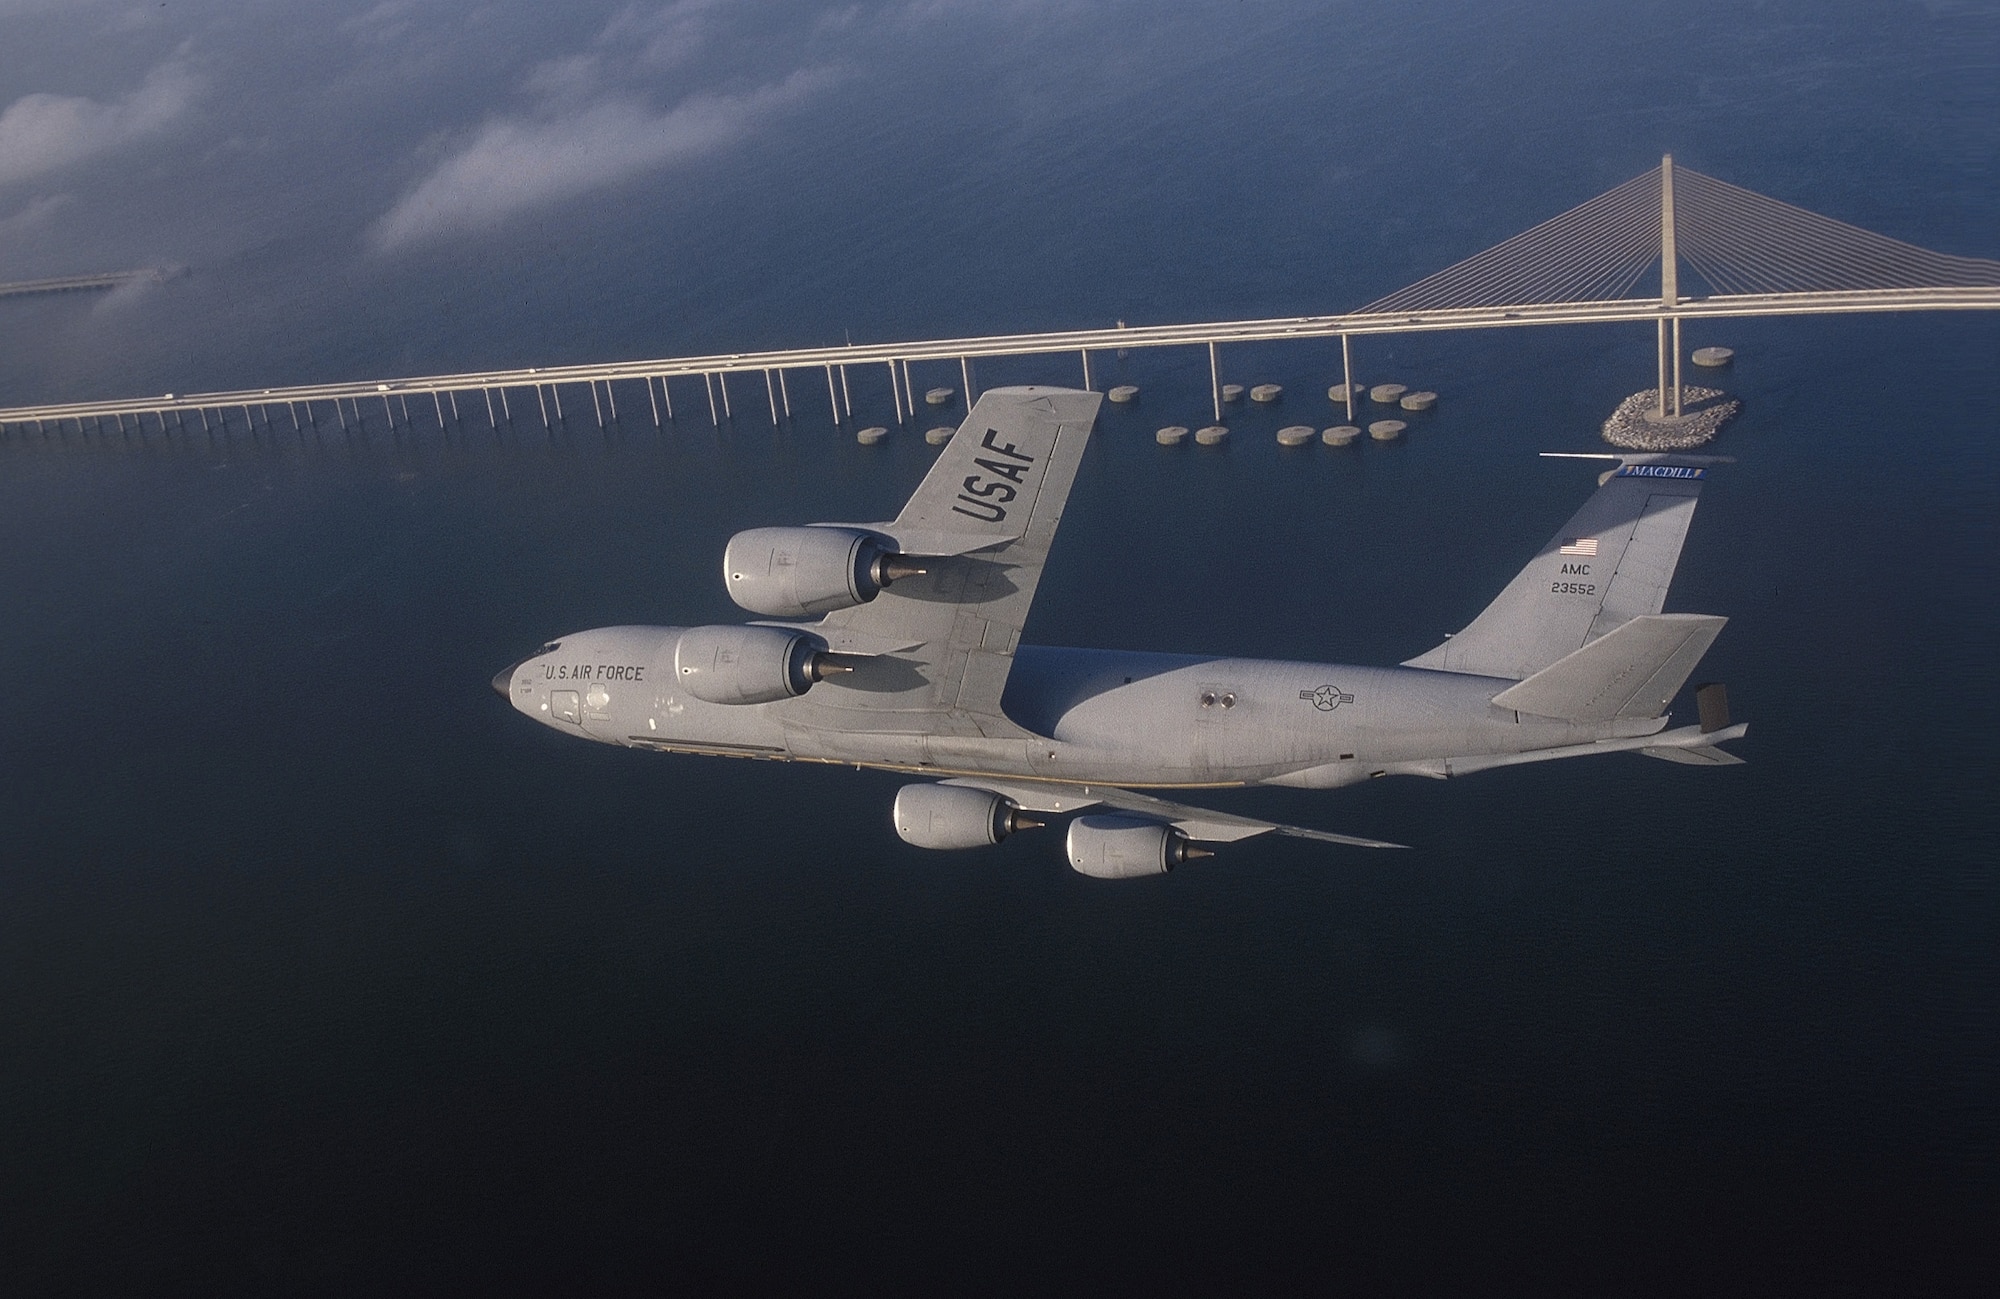 A KC-135R Stratotanker assigned to the 6th Air Refueling Wing, 91st Air Refueling Squadron, at MacDill Air Force Base, Fla., flies a training mission over central Florida. The KC-135's principal mission is air refueling while four turbofans, mounted under 35-degree swept wings, power the KC-135 to takeoffs at gross weights up to 322,500 pounds. (U.S. Air Force photo by Master Sgt Keith Reed)